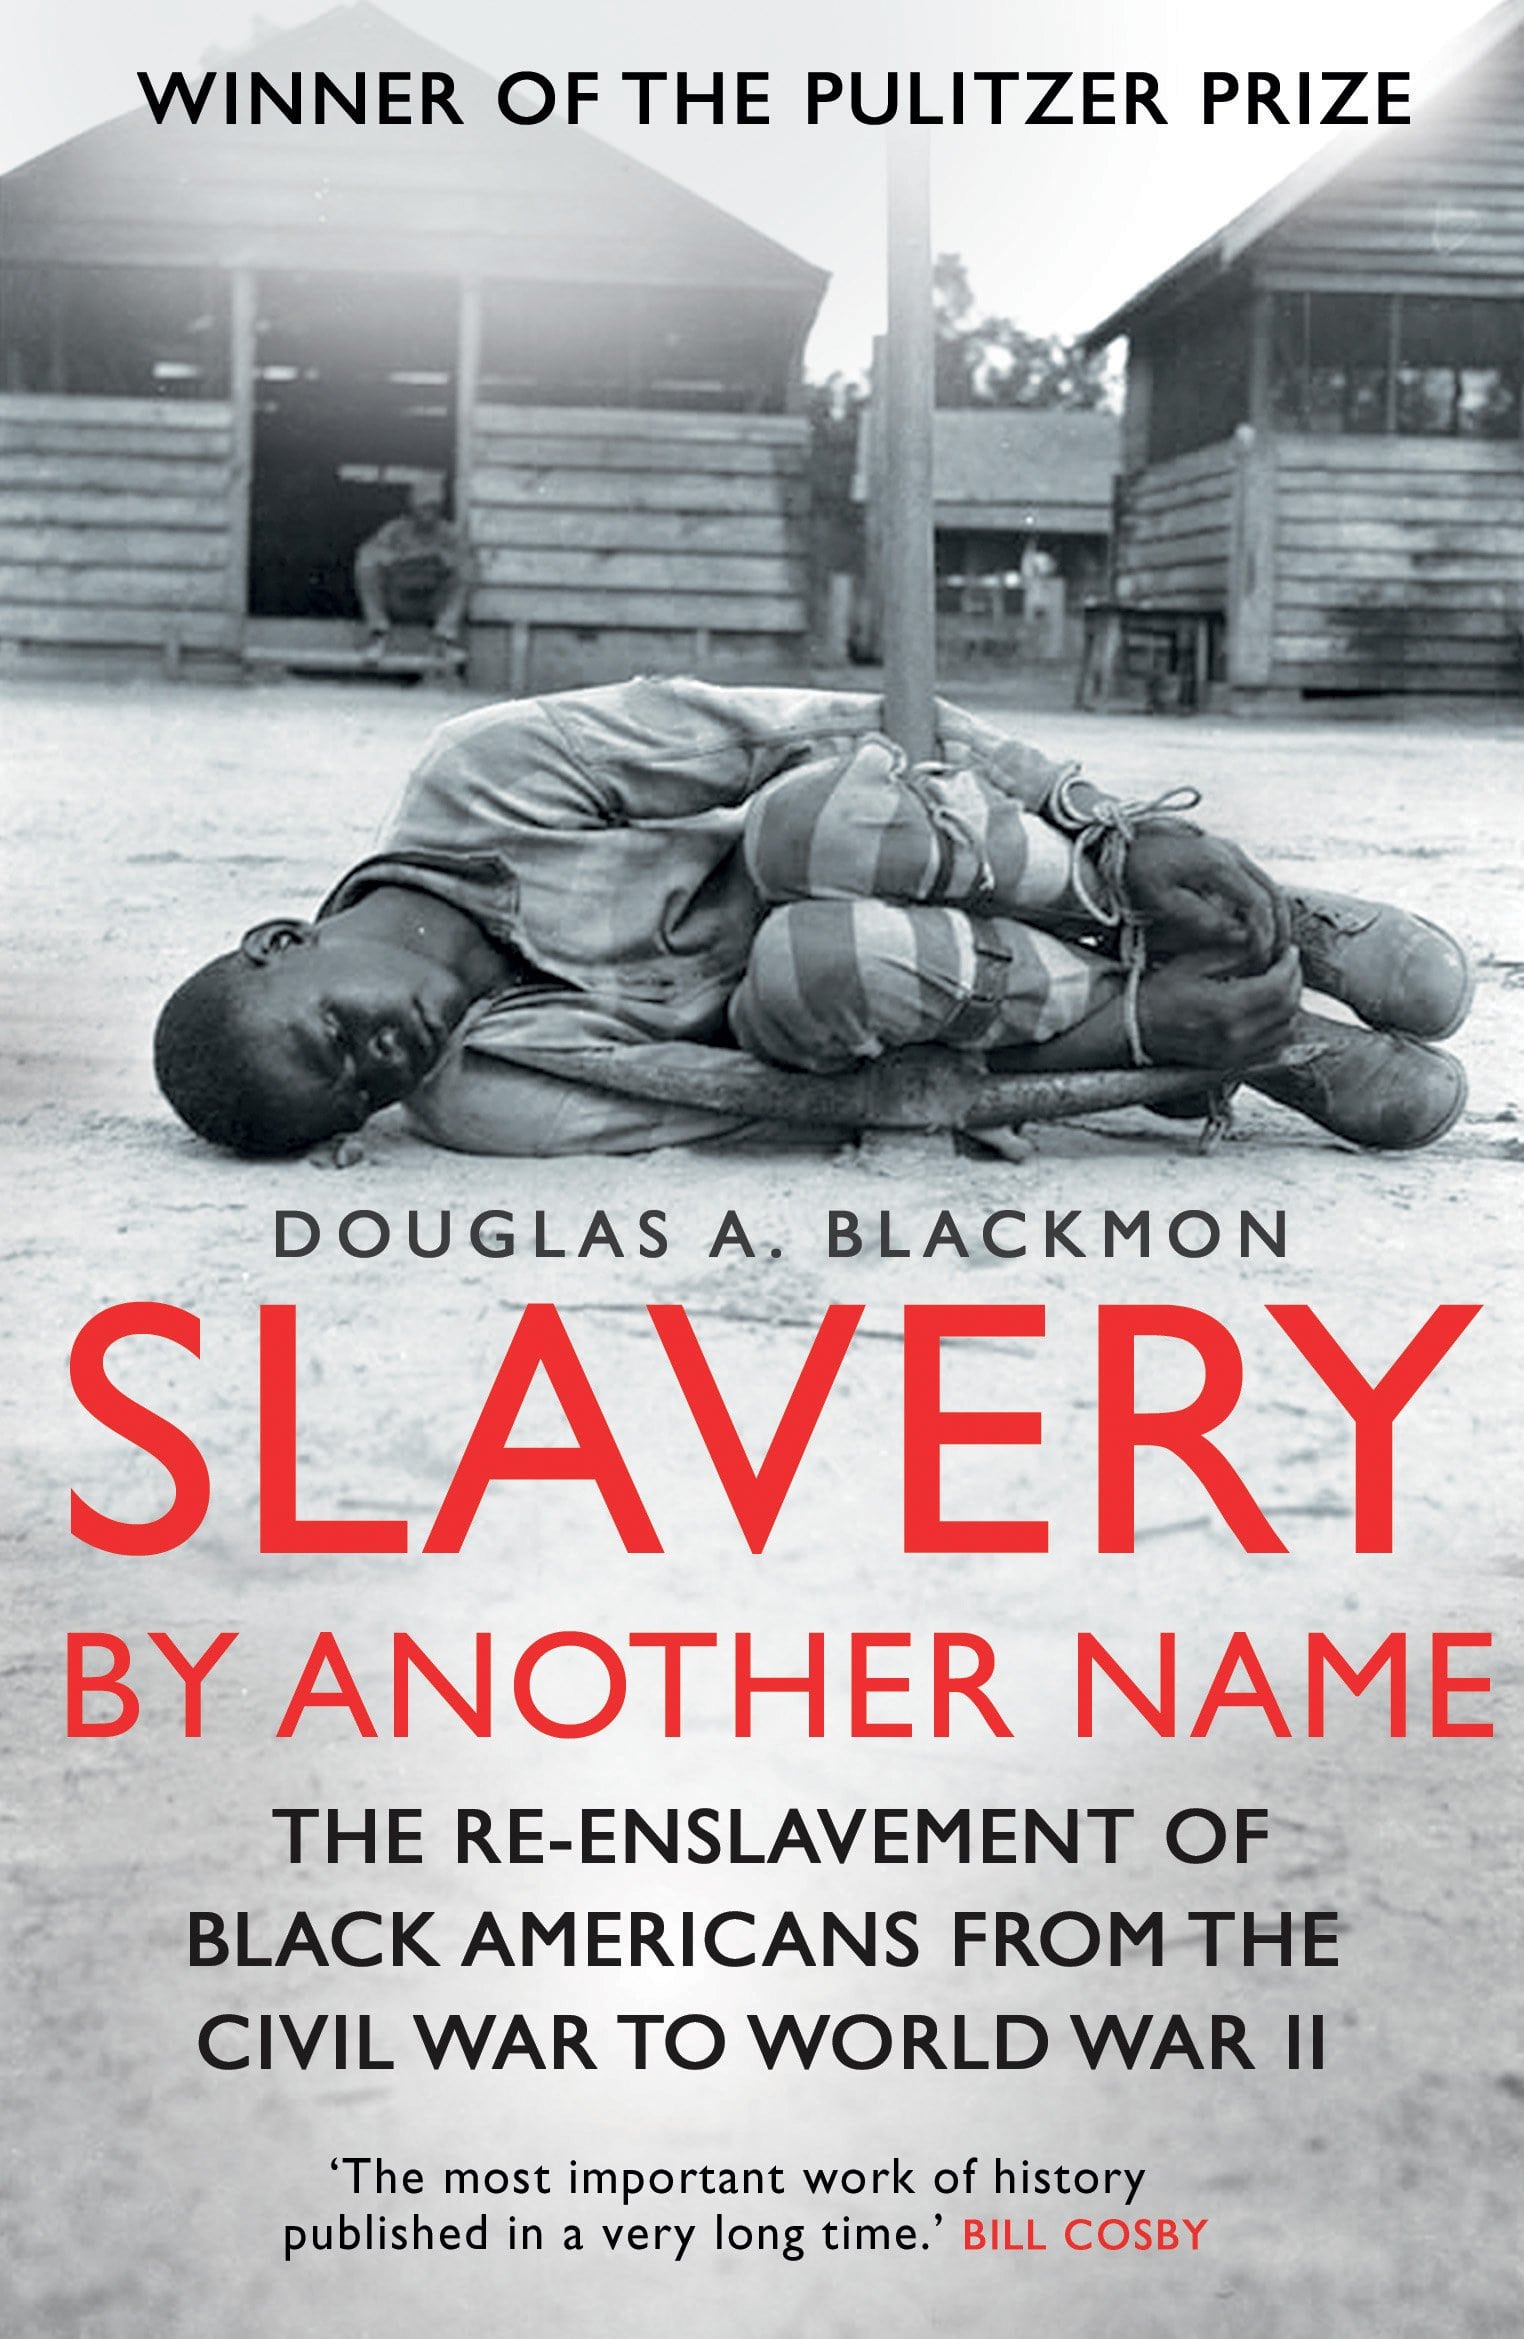 Slavery-by-Another-Name-min.jpg